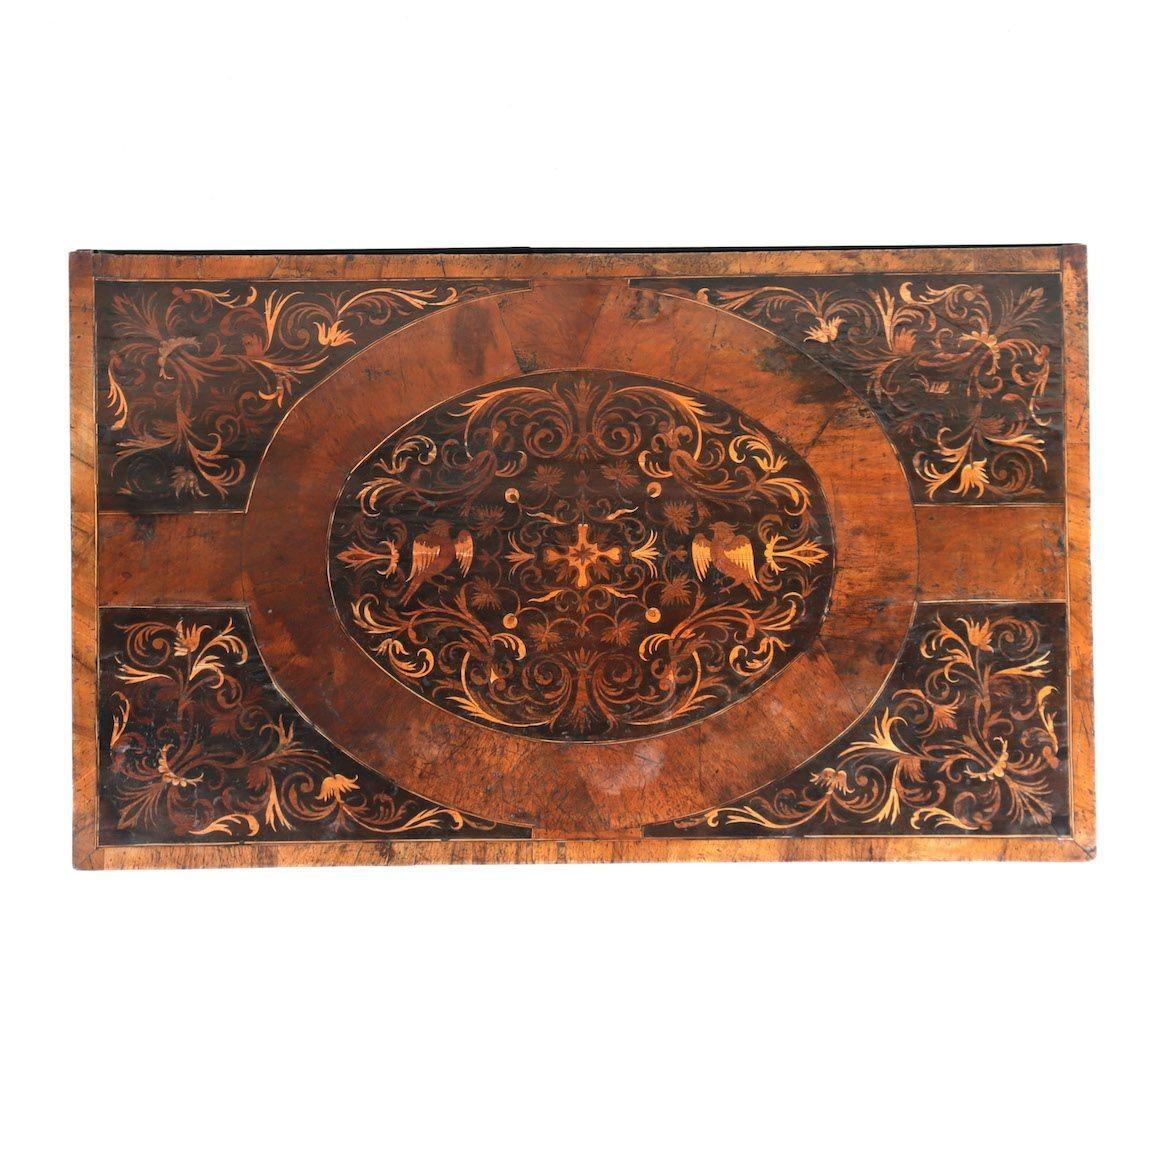 17th c. English William & Mary Walnut and Ebony Seaweed Marquetry Commode For Sale 3